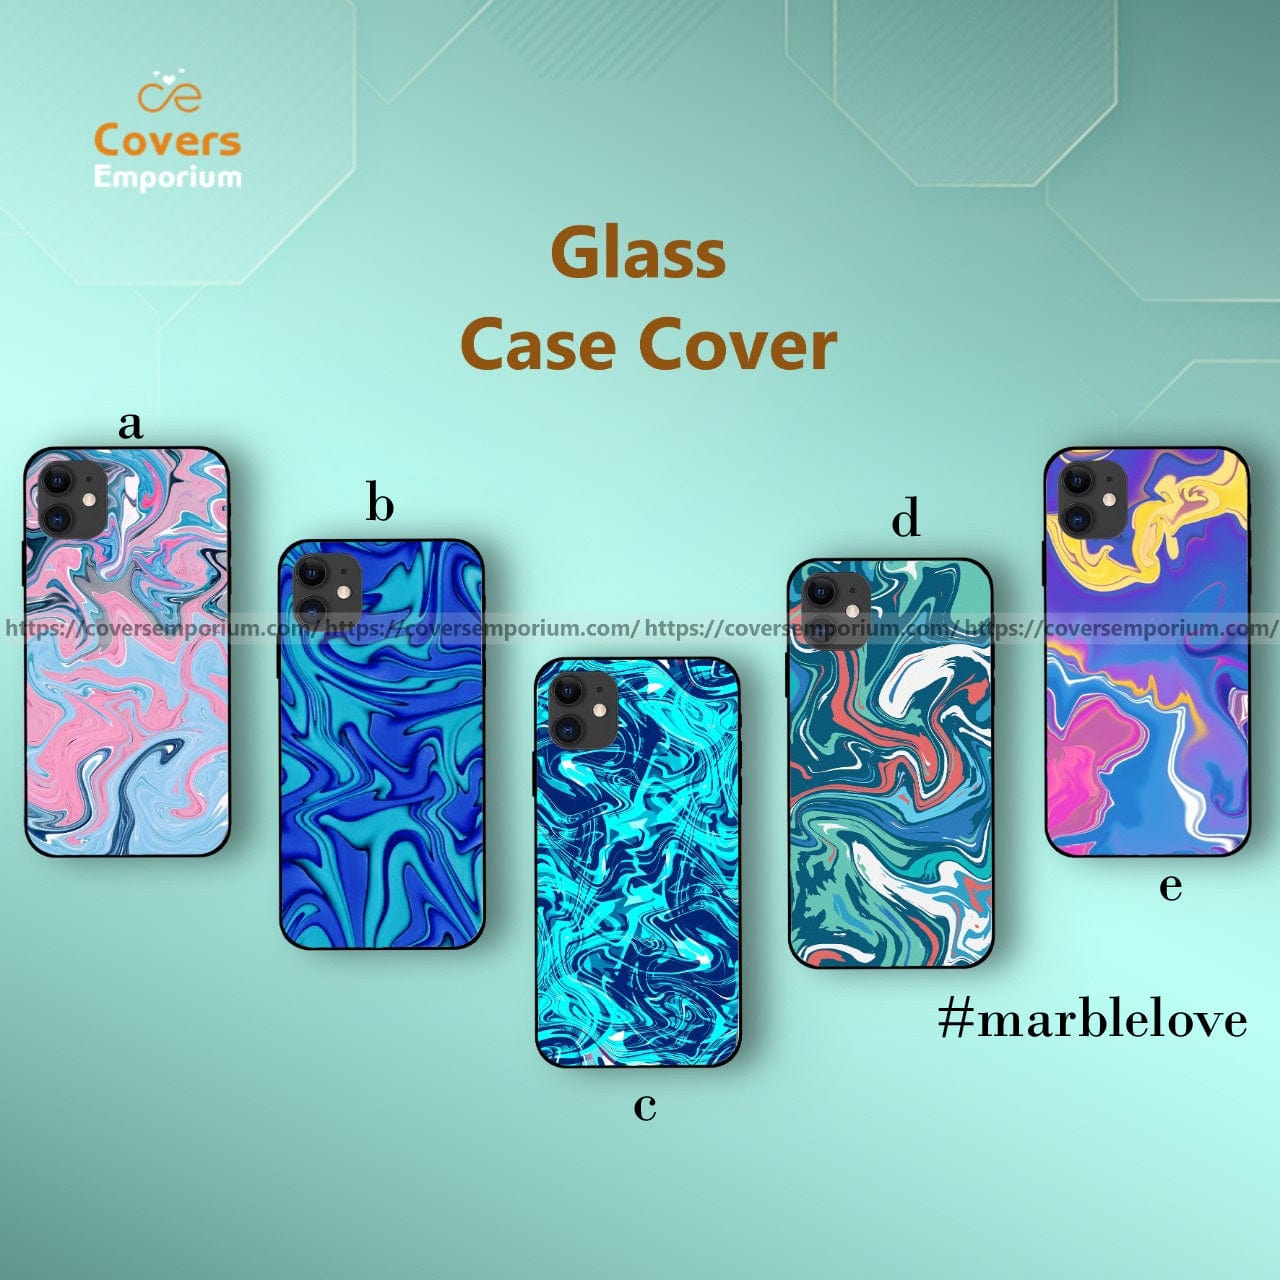 Marble Love Glass cases